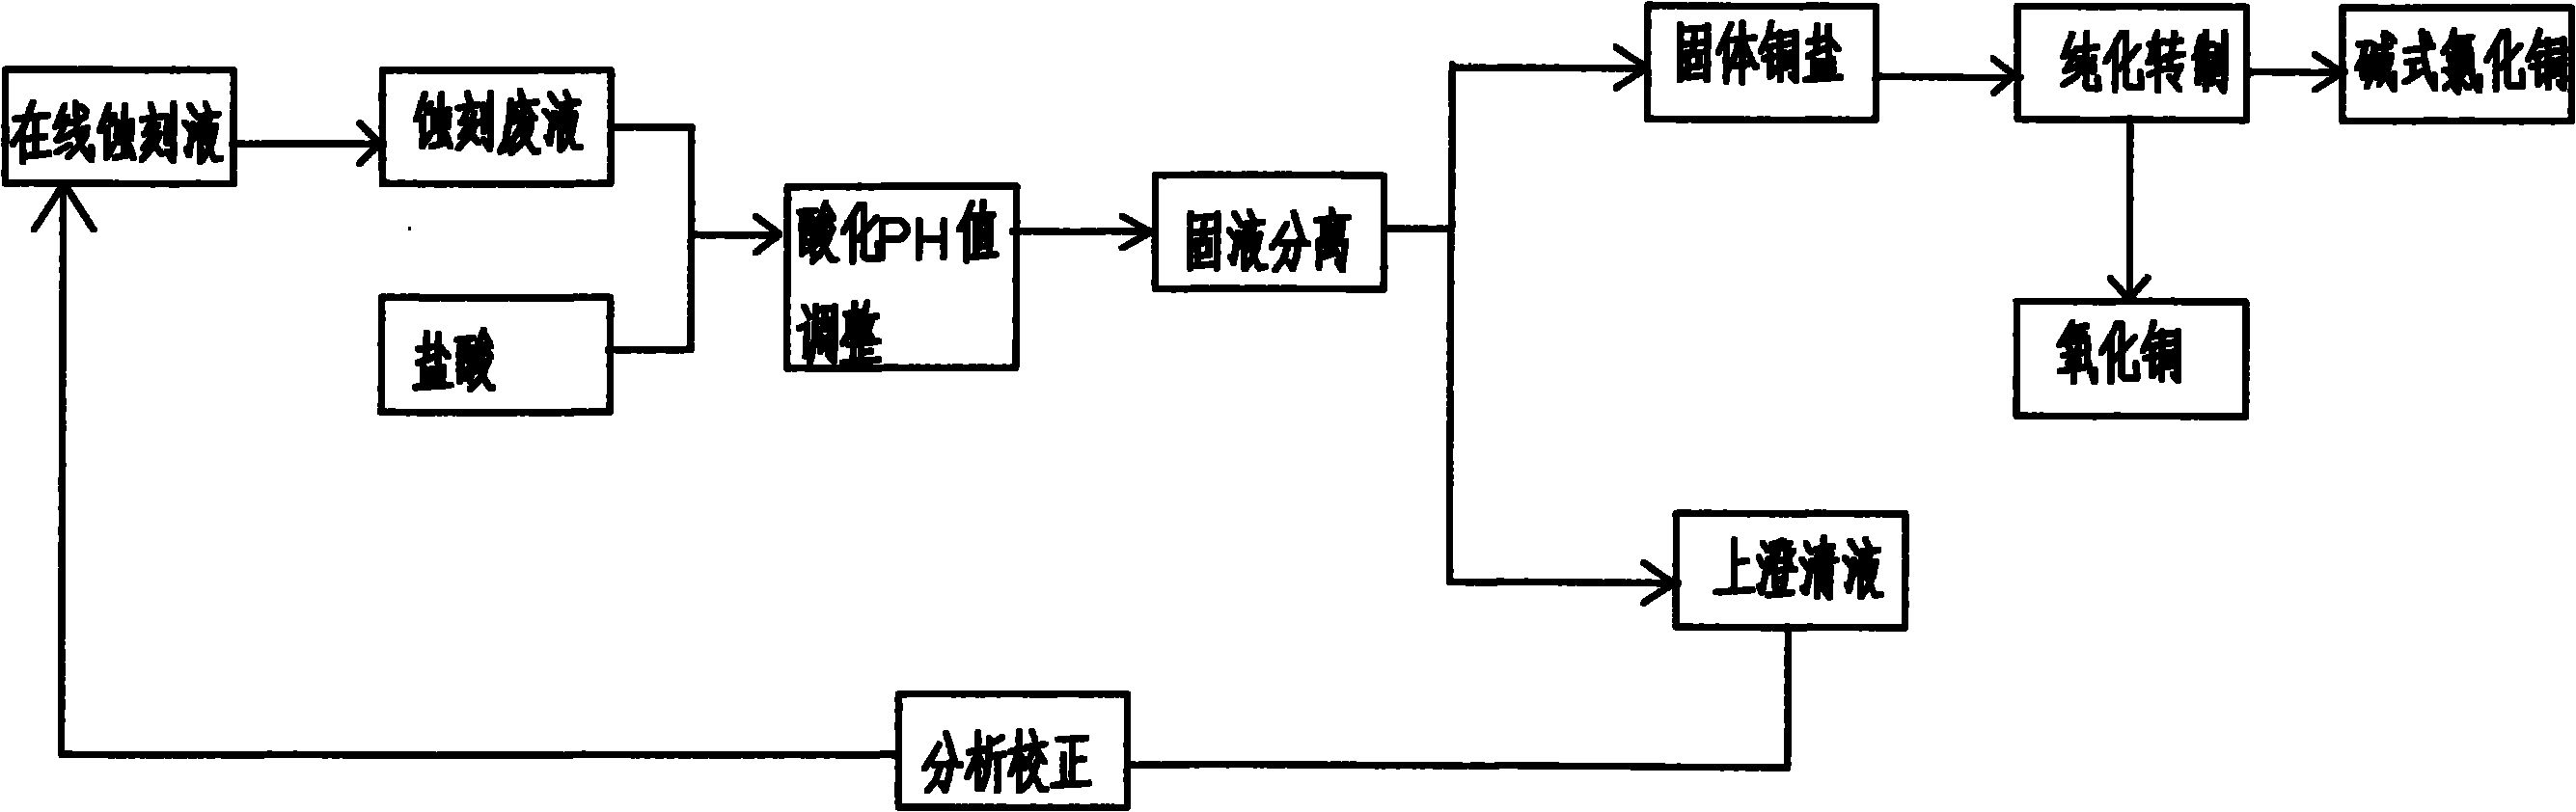 Process for recycling alkali waste etching liquid